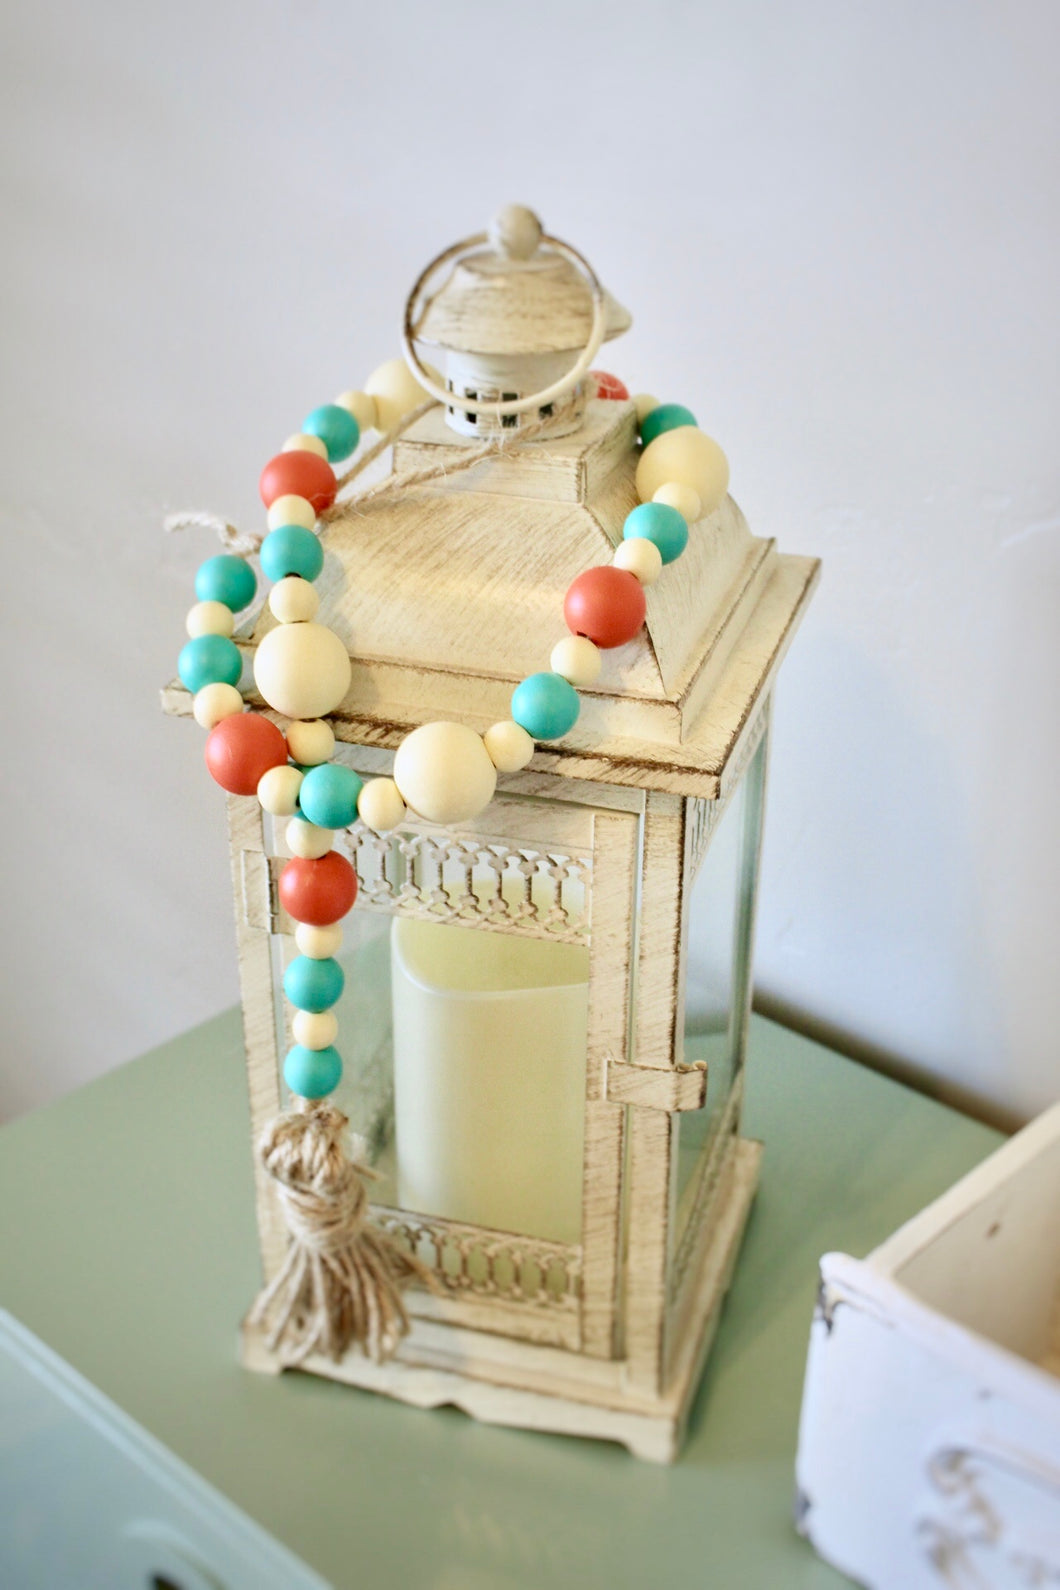 Summer Taffy Wood Bead garland with tassel and loop for hanging. Comes in a coral, cream and mint colored beads